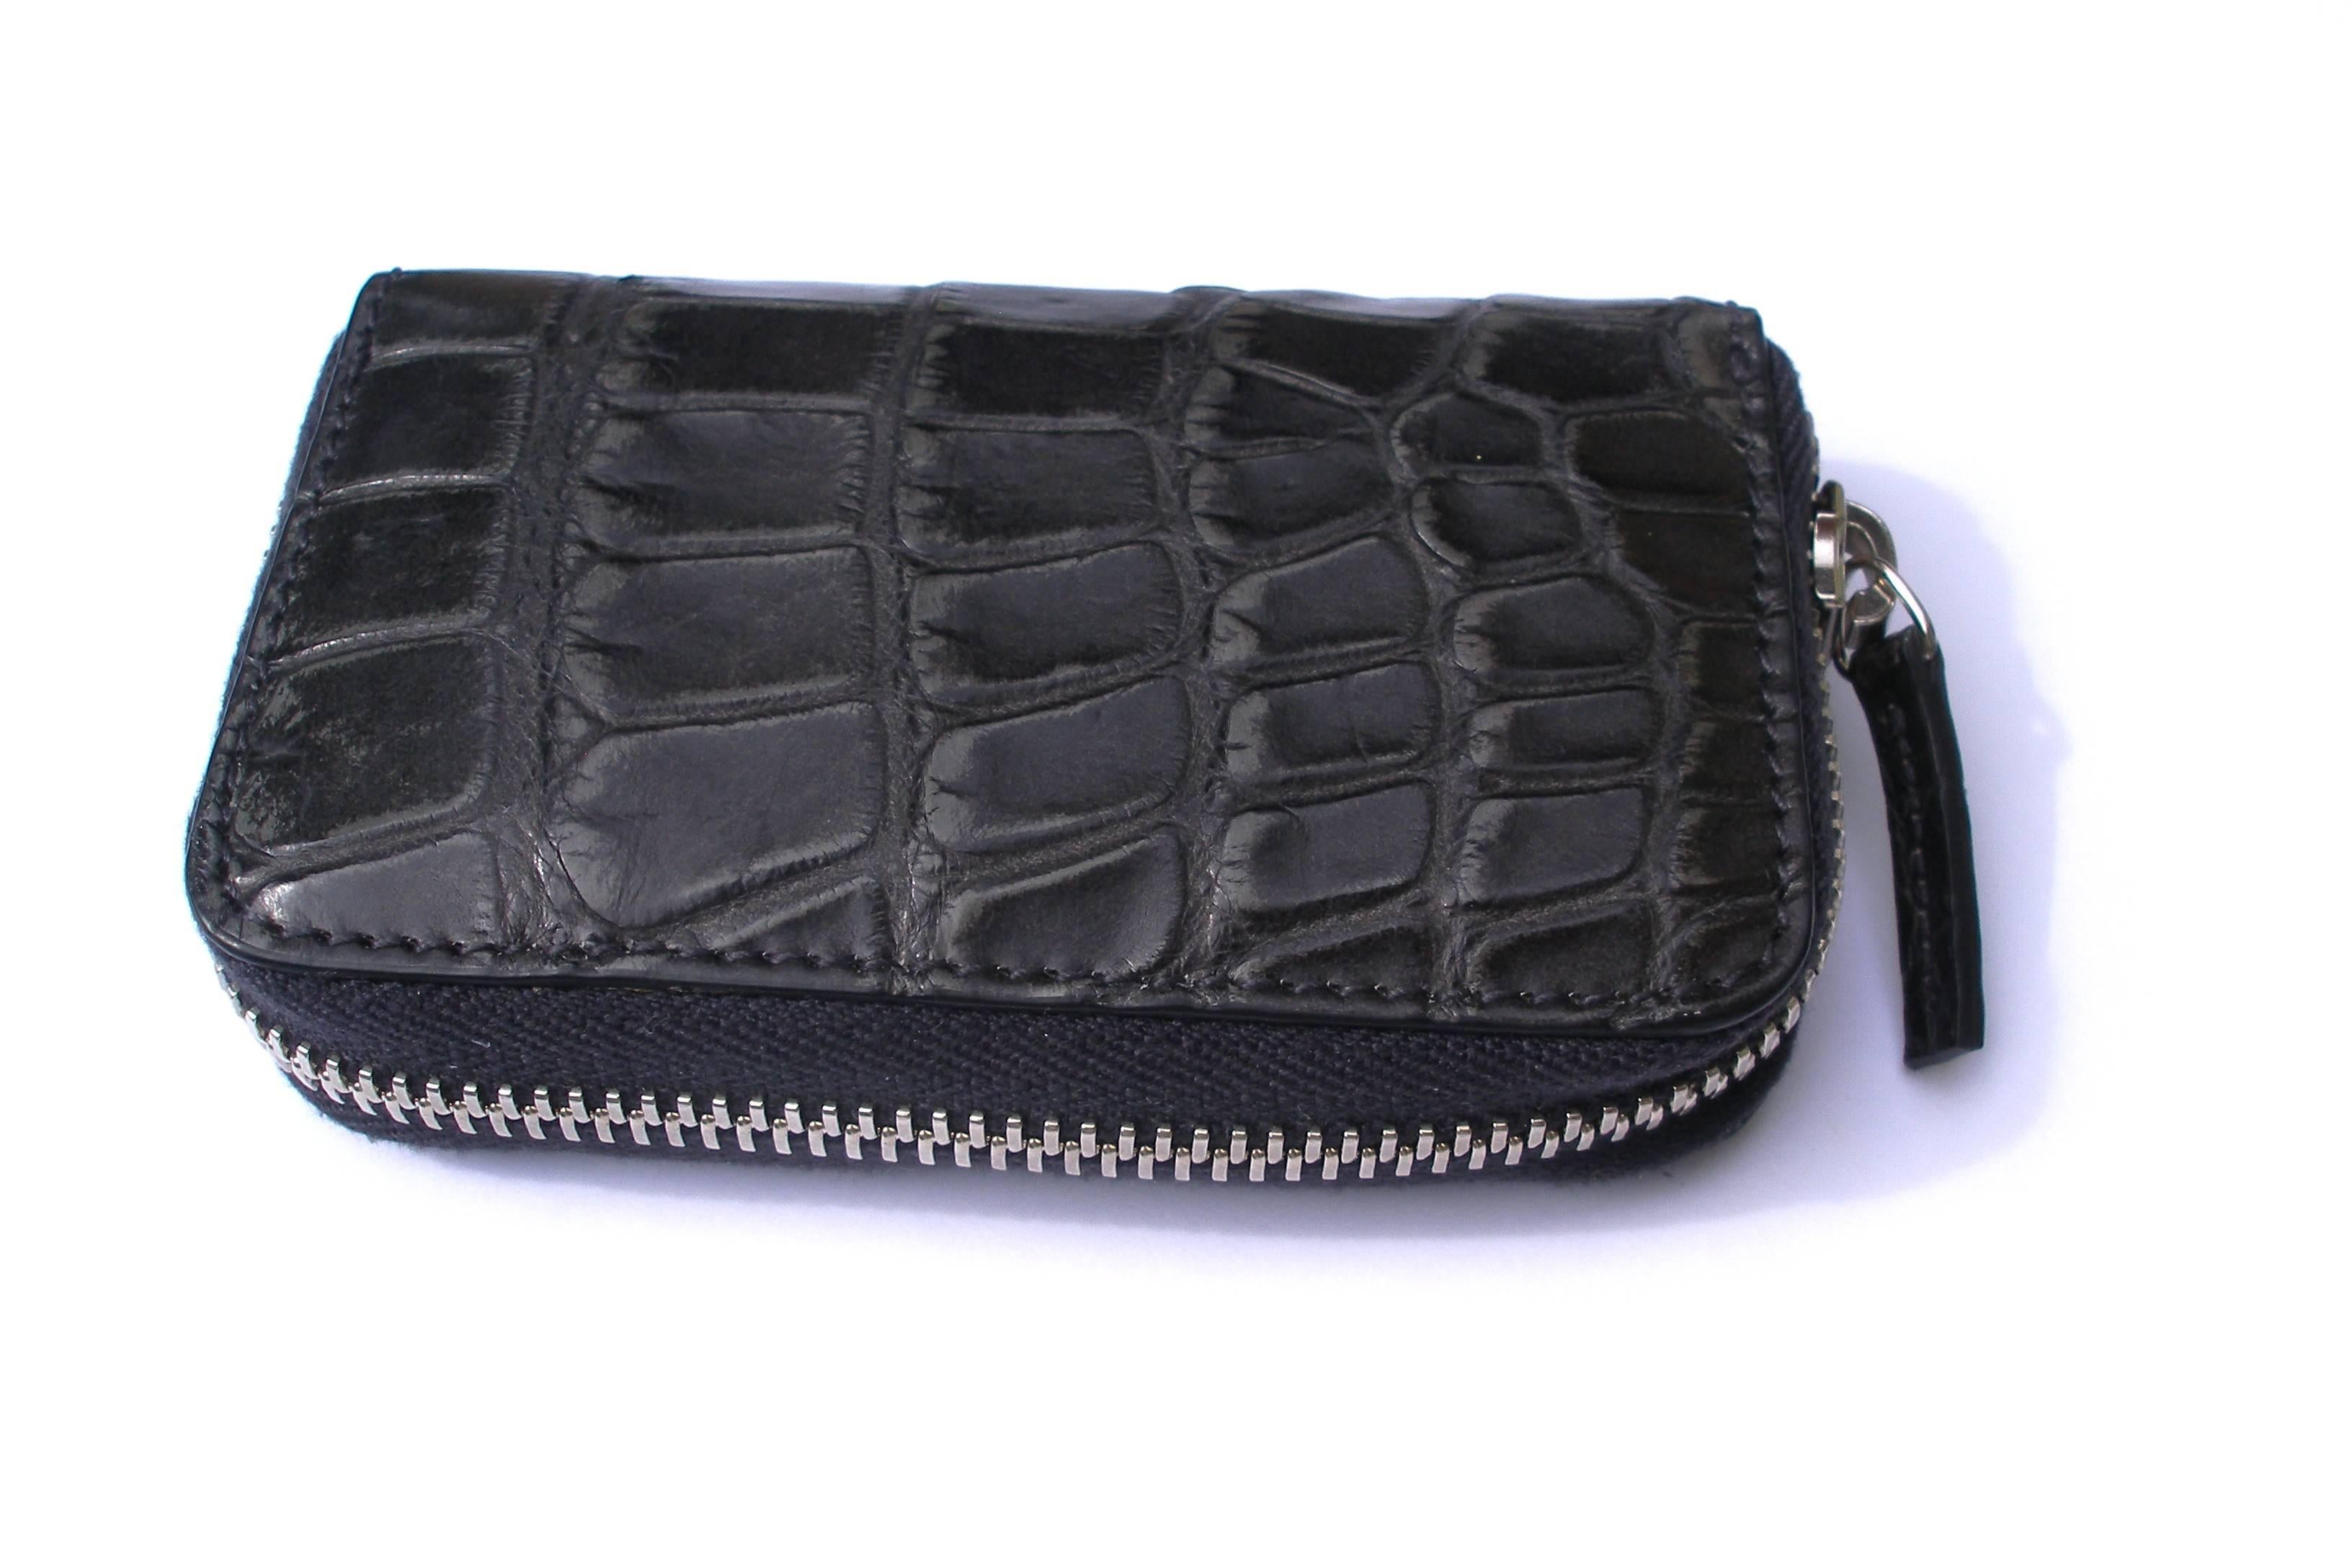     Wonderfull and Good Deal 
    Black Alligator leather with black leather trim/interior
    Palladium toned hardware
    Four card slots and two bill compartments
    Middle zip coin pocket
    Zip around closure
    Small size 
    4.7"L x